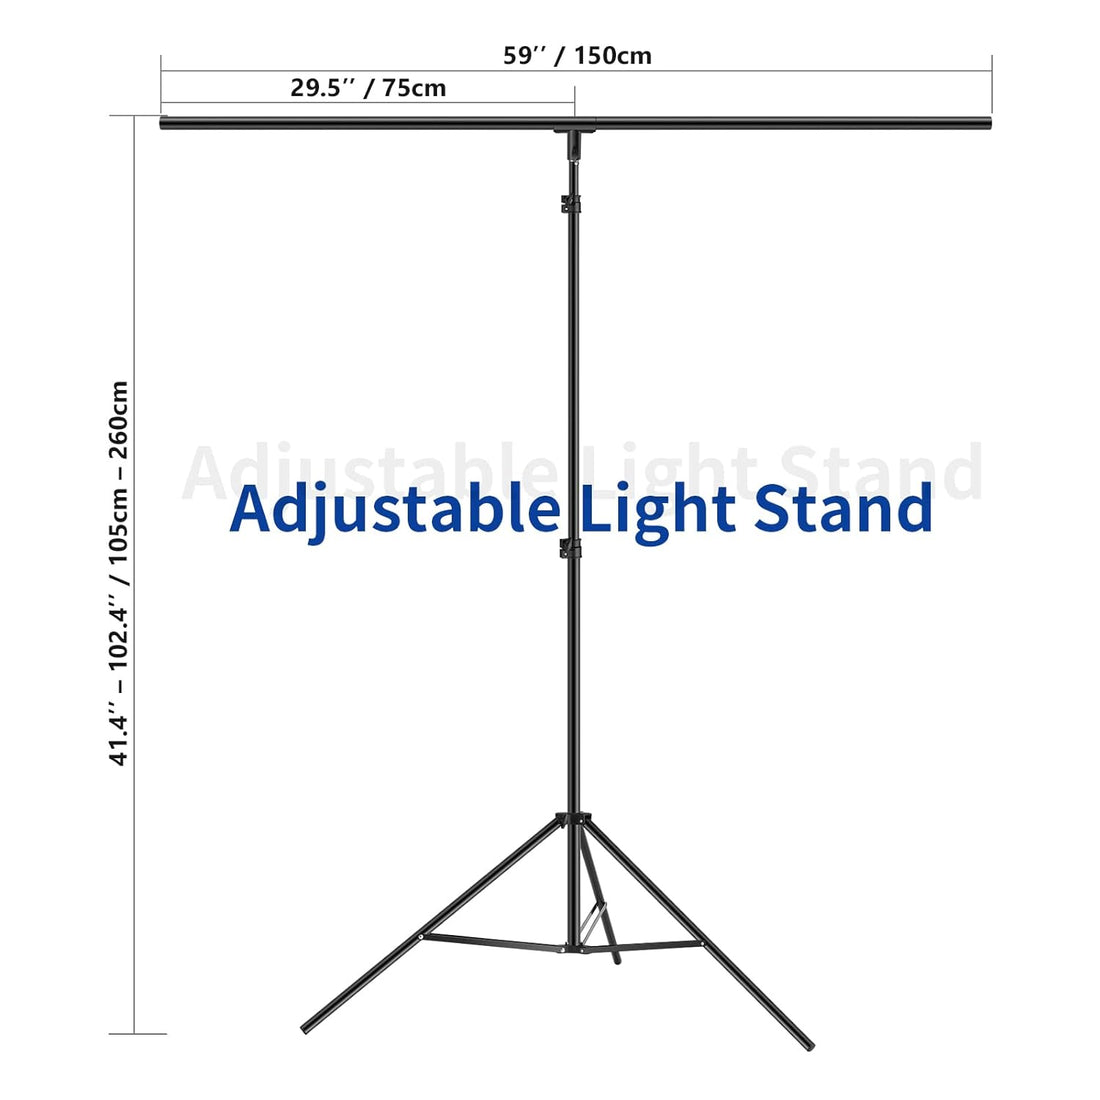 NEEWER T-Shaped Background Backdrop Support Stand Kit, 8.5ft/2.6m Tall Adjustable Tripod Stand and 5ft/1.5m Wide Crossbars with 6 Spring Clamps and 1 Carrying Bag for Studio Photo Video Photography